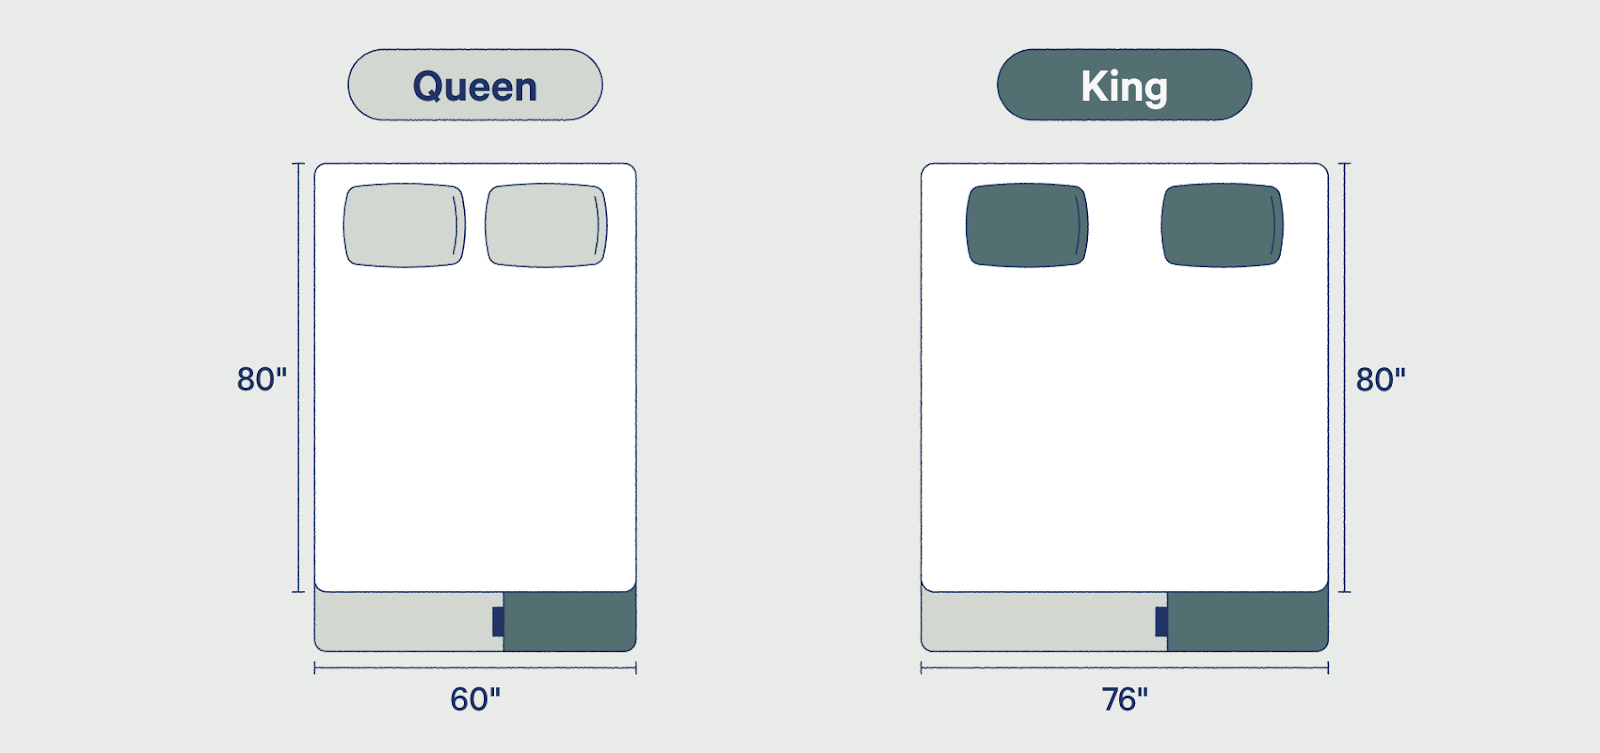 King Vs Queen Bed Size And Comparison, How Long Is A King Bed In Feet